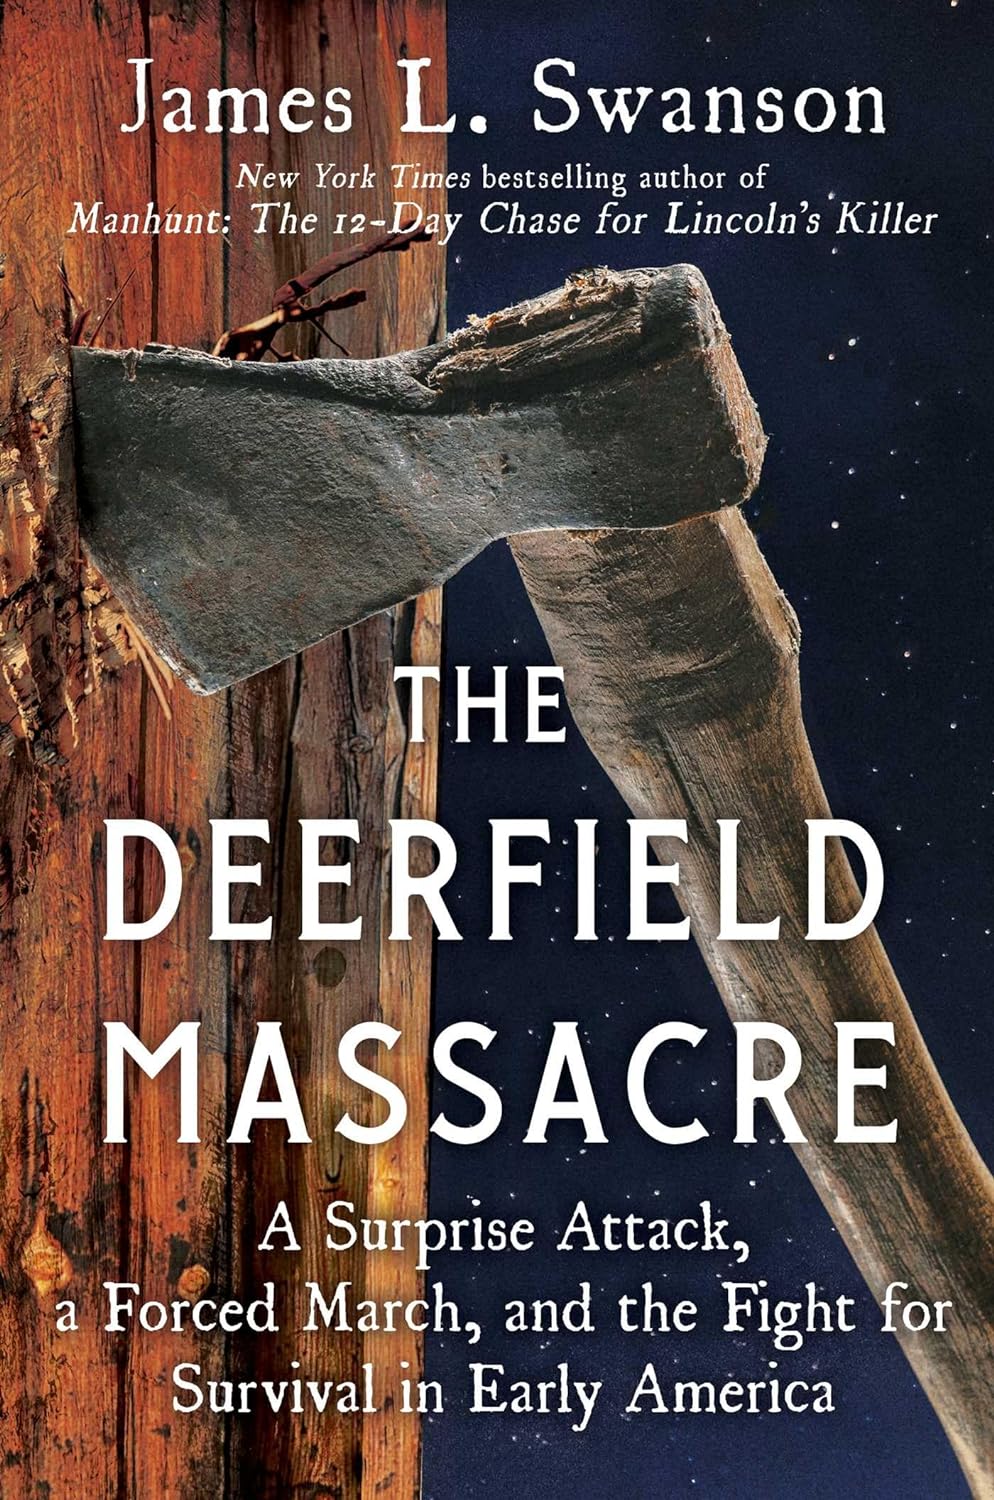 Image for "The Deerfield Massacre"